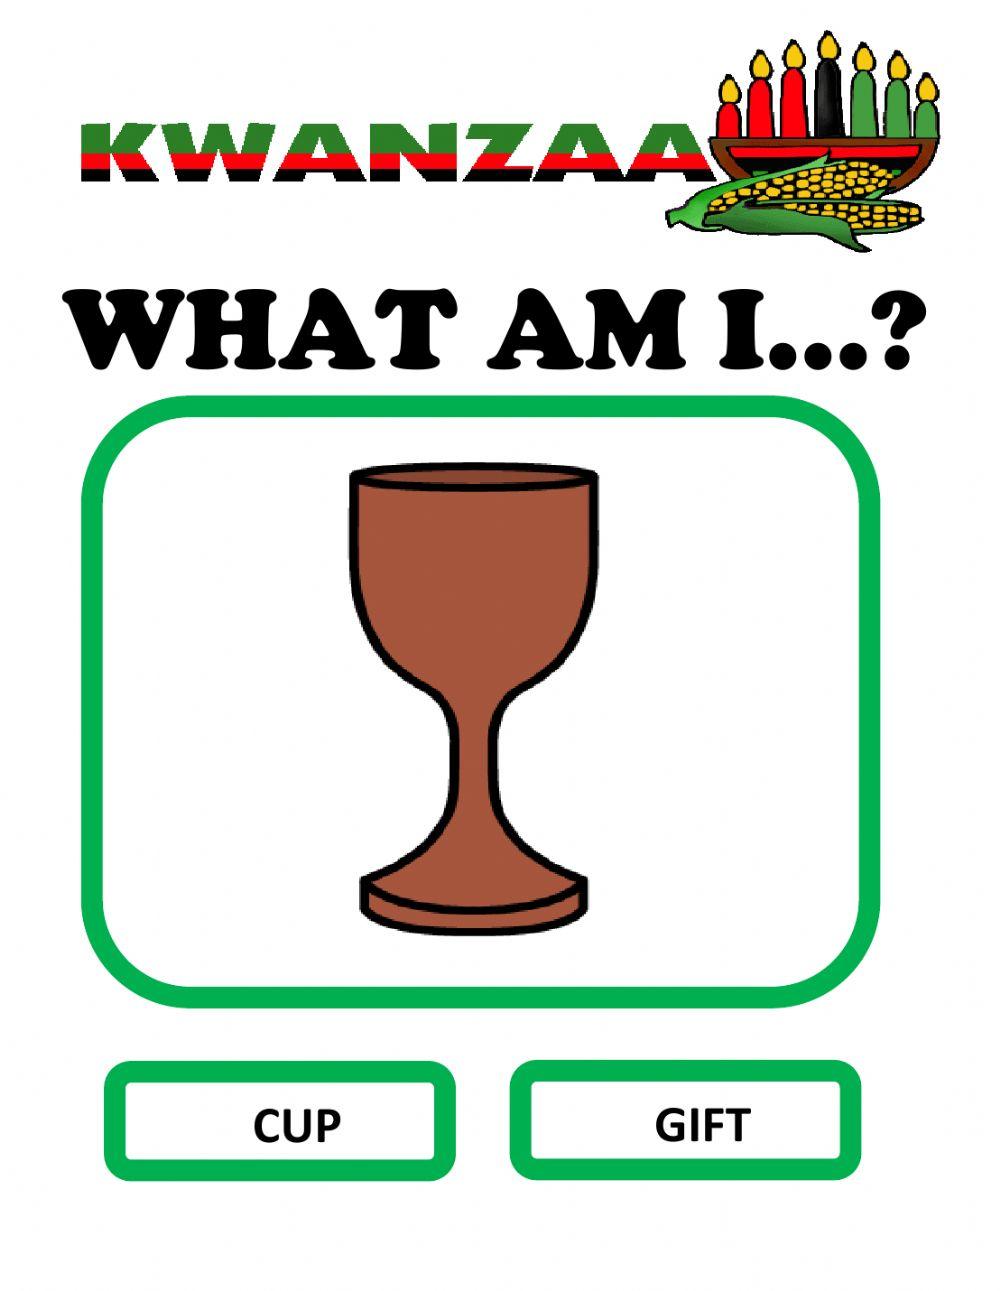 Kwanzaa - What Am I? Who Are We?